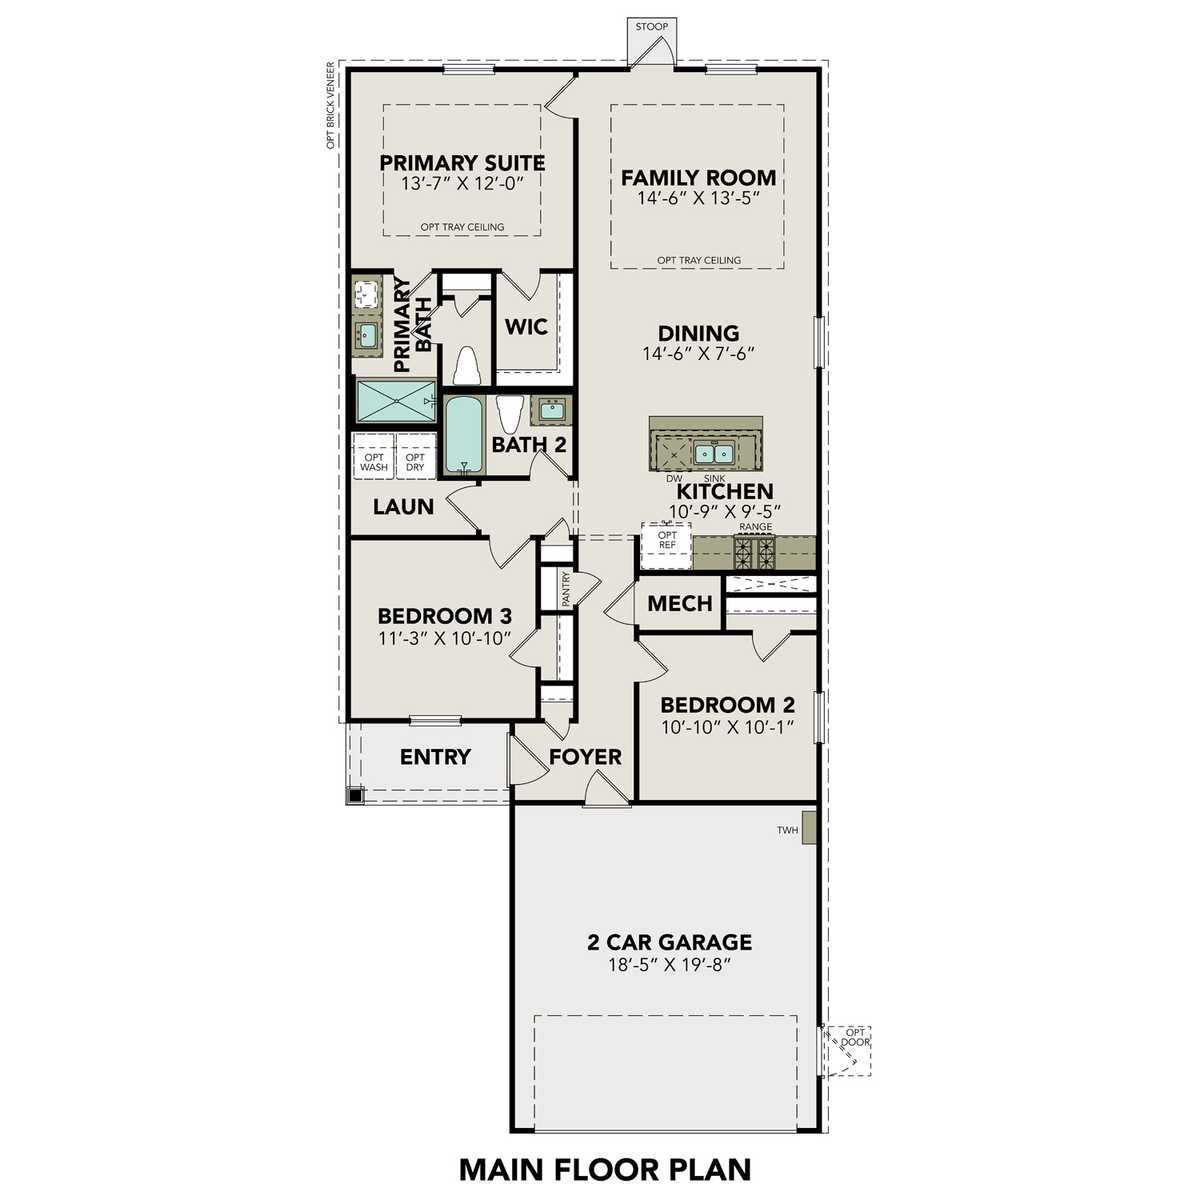 1 - The Comal Brick floor plan layout for 8308 Bristlecone Pine Way in Davidson Homes' Lakes at Black Oak community.